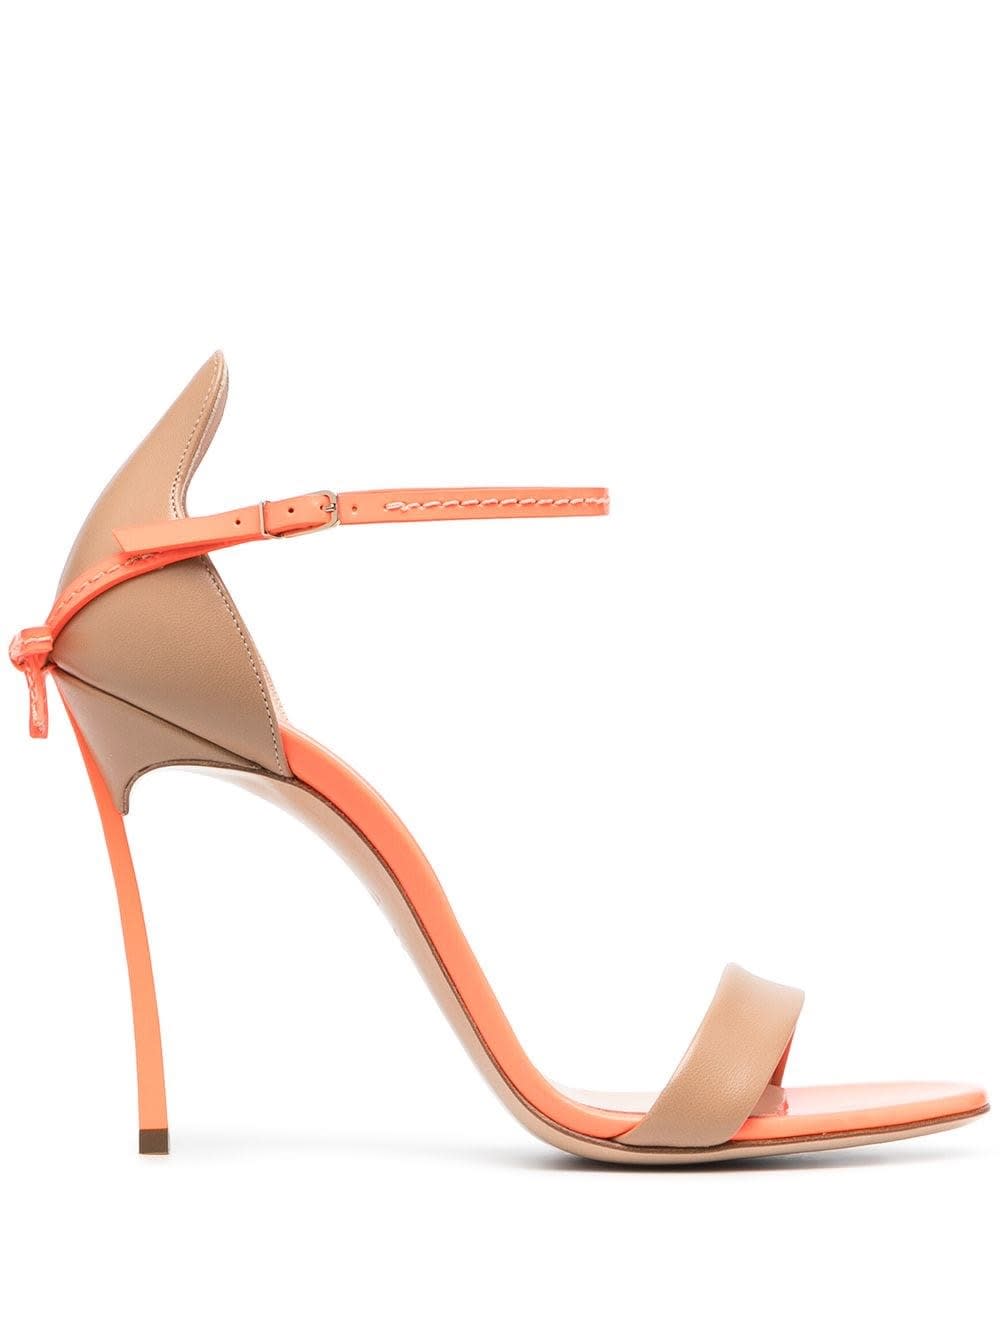 Casadei Beige Leather Sandals With Bow